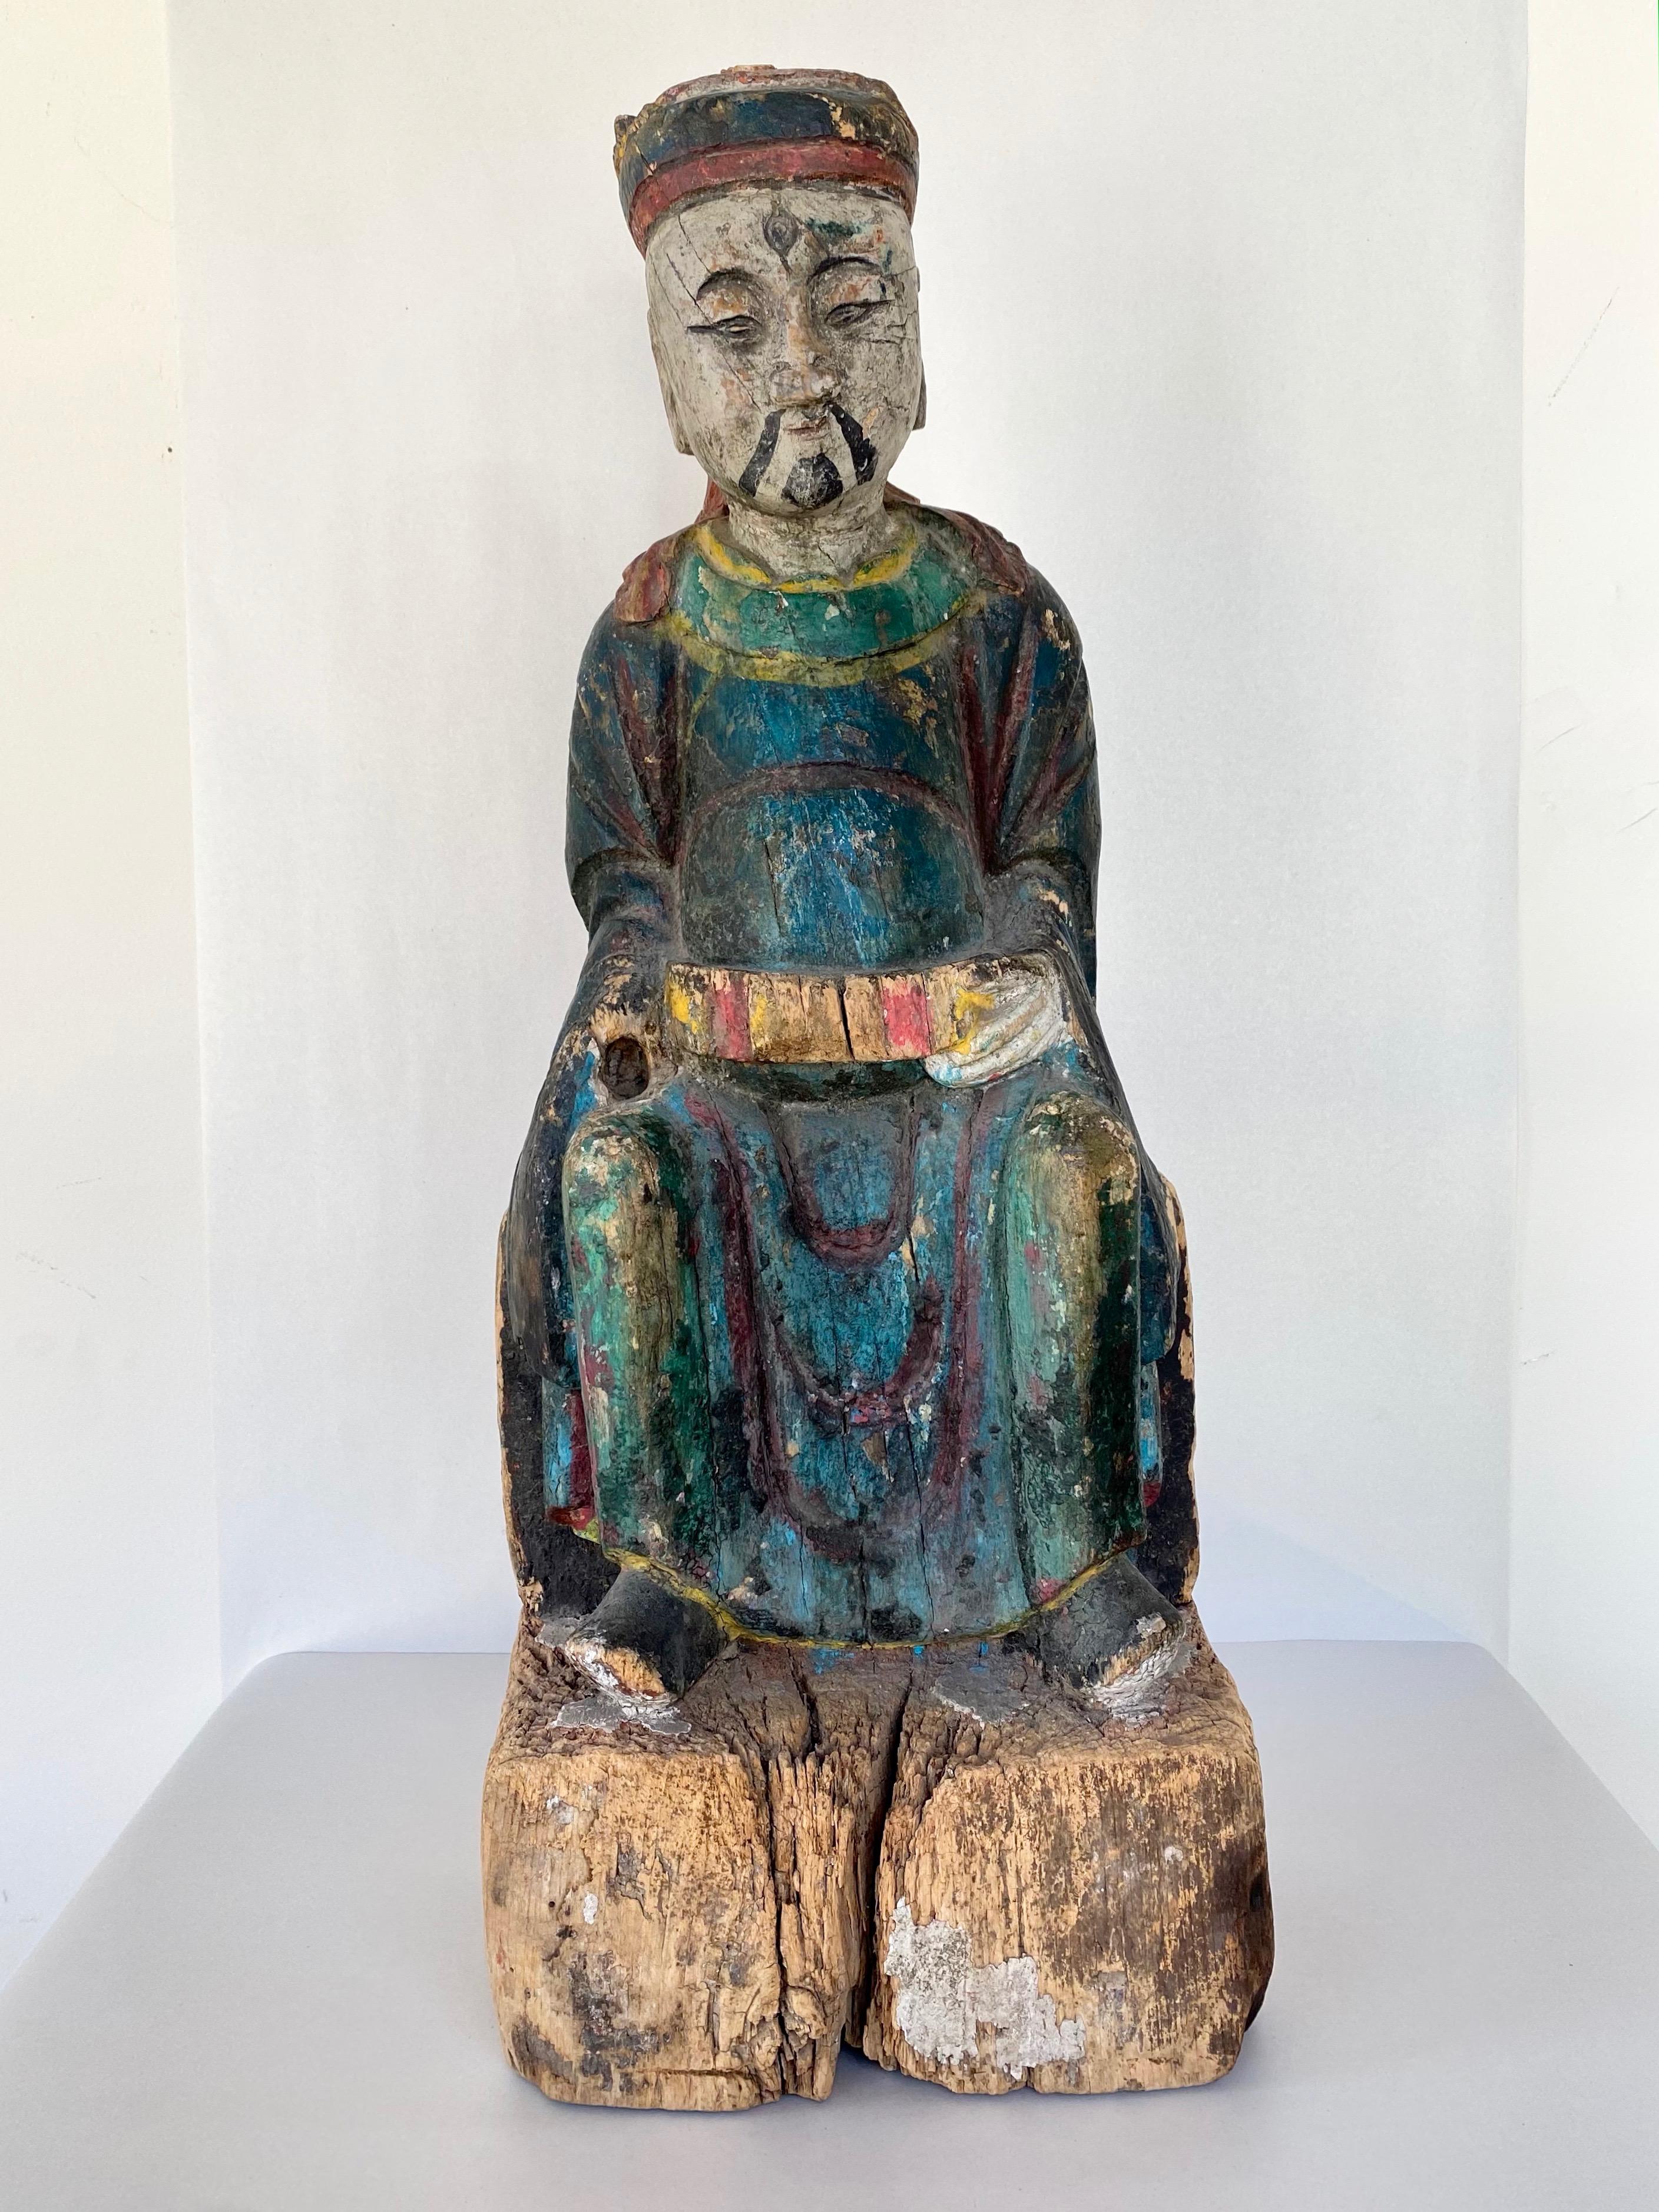 A Chinese Qing dynasty hand-carved wooden statue of a royal sage with original polychrome finish. Attributed to the Ming dynasty circa 1640 by a previous gallery, though overall look and Jian Ding certified export seal suggest that it more likely